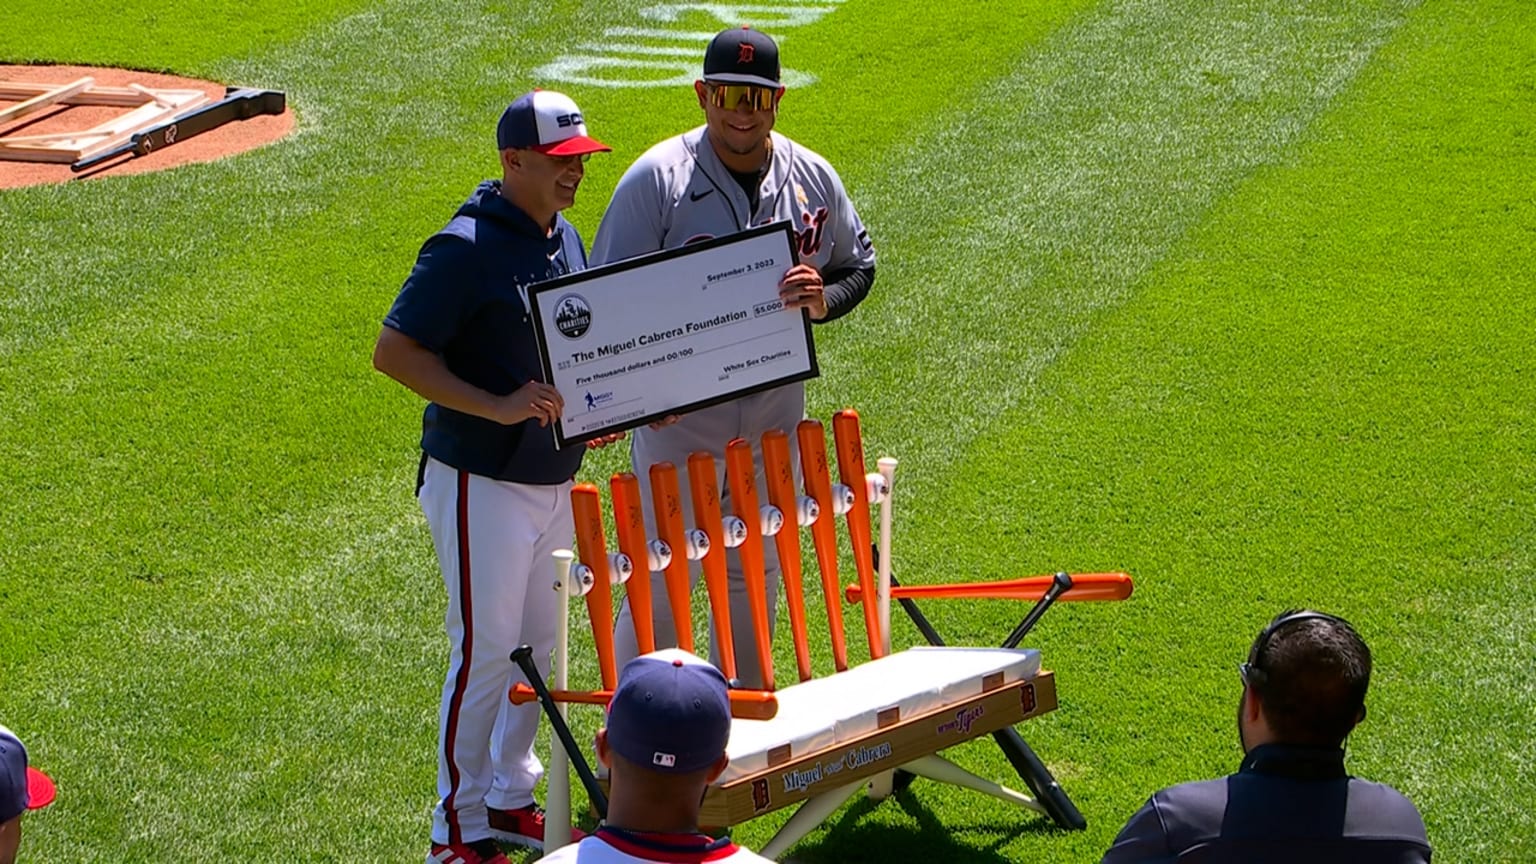 White Sox honor Miguel Cabrera, who reminds them how much he has